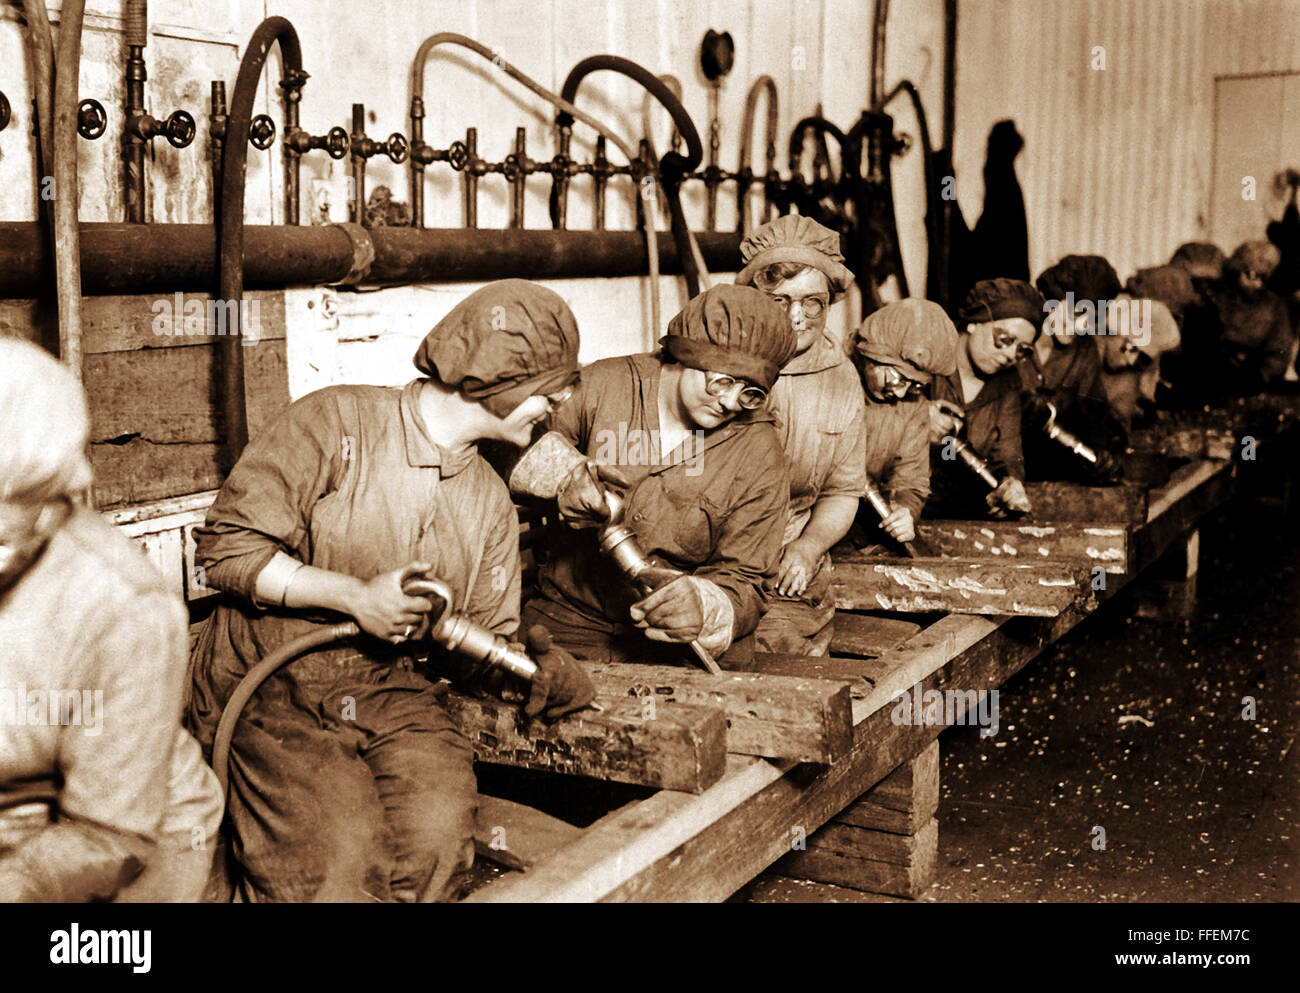 Women workers in ordnance shops, Midvale Steel and Ordnance Co., Nicetown, Pa.  Hand chipping with pneumatic hammers. Circa 1918.  Photograph by Lt. Lubbe/US Army  This archival print is available in the following sizes:  8' x 10'   $15.95 w/ FREE SHIPPING 11' x 14' $23.95 w/ FREE SHIPPING 16' x 20' $59.95 w/ FREE SHIPPING 20' x 24' $99.95 w/ FREE SHIPPING  * The American Photoarchive watermark will not appear on your print. Stock Photo